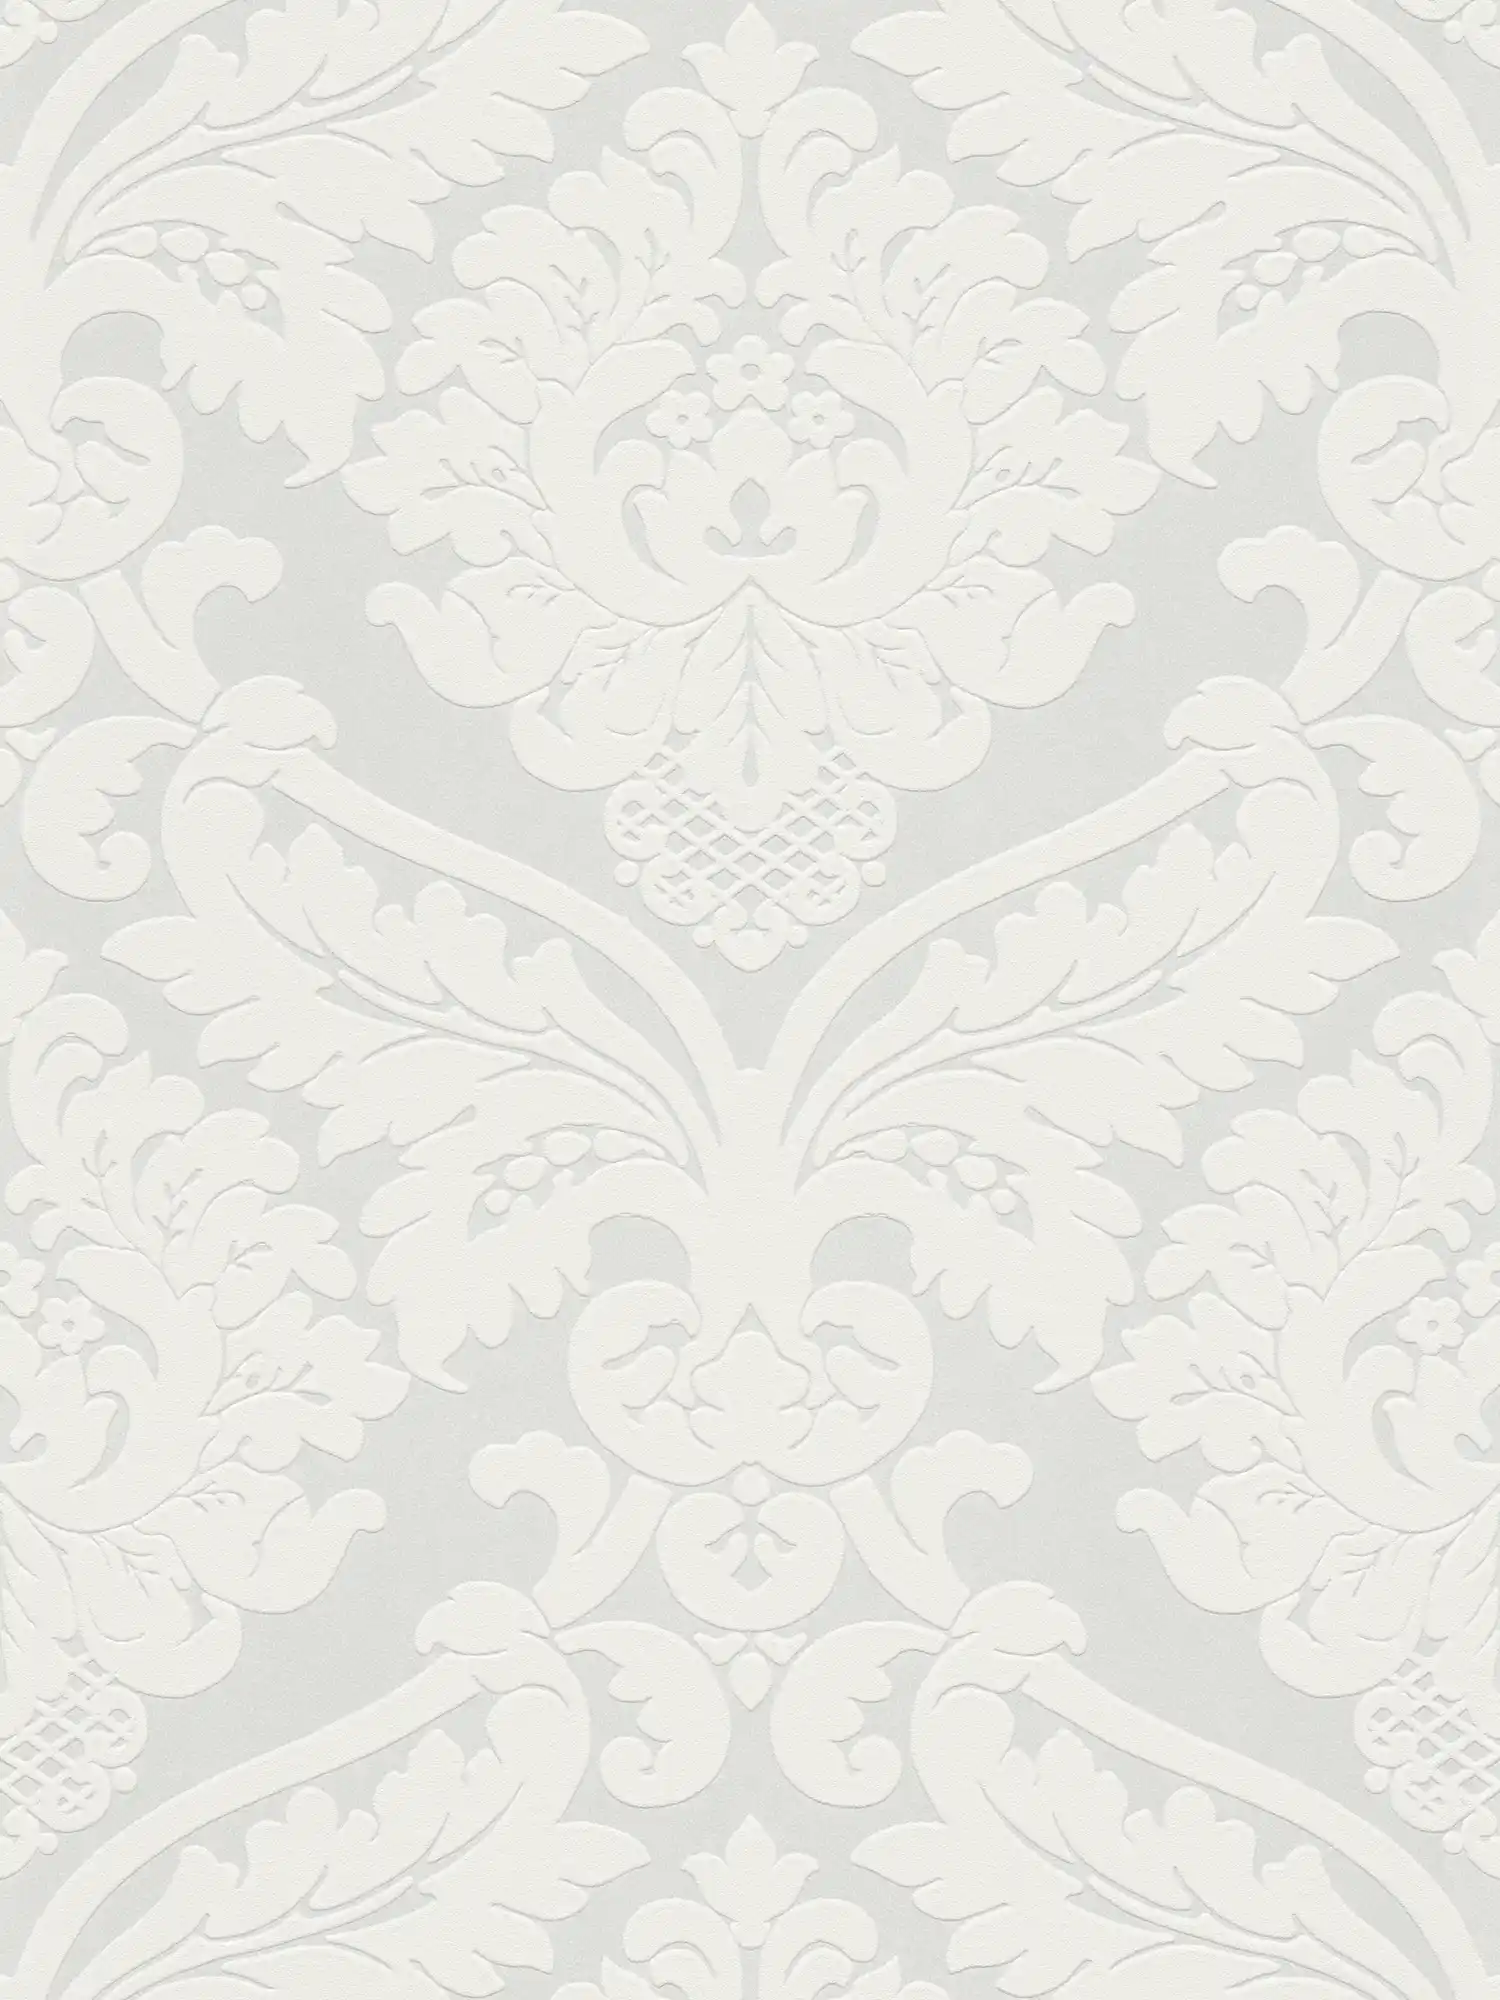 Baroque wallpaper with 3D floral ornament - metallic, white
